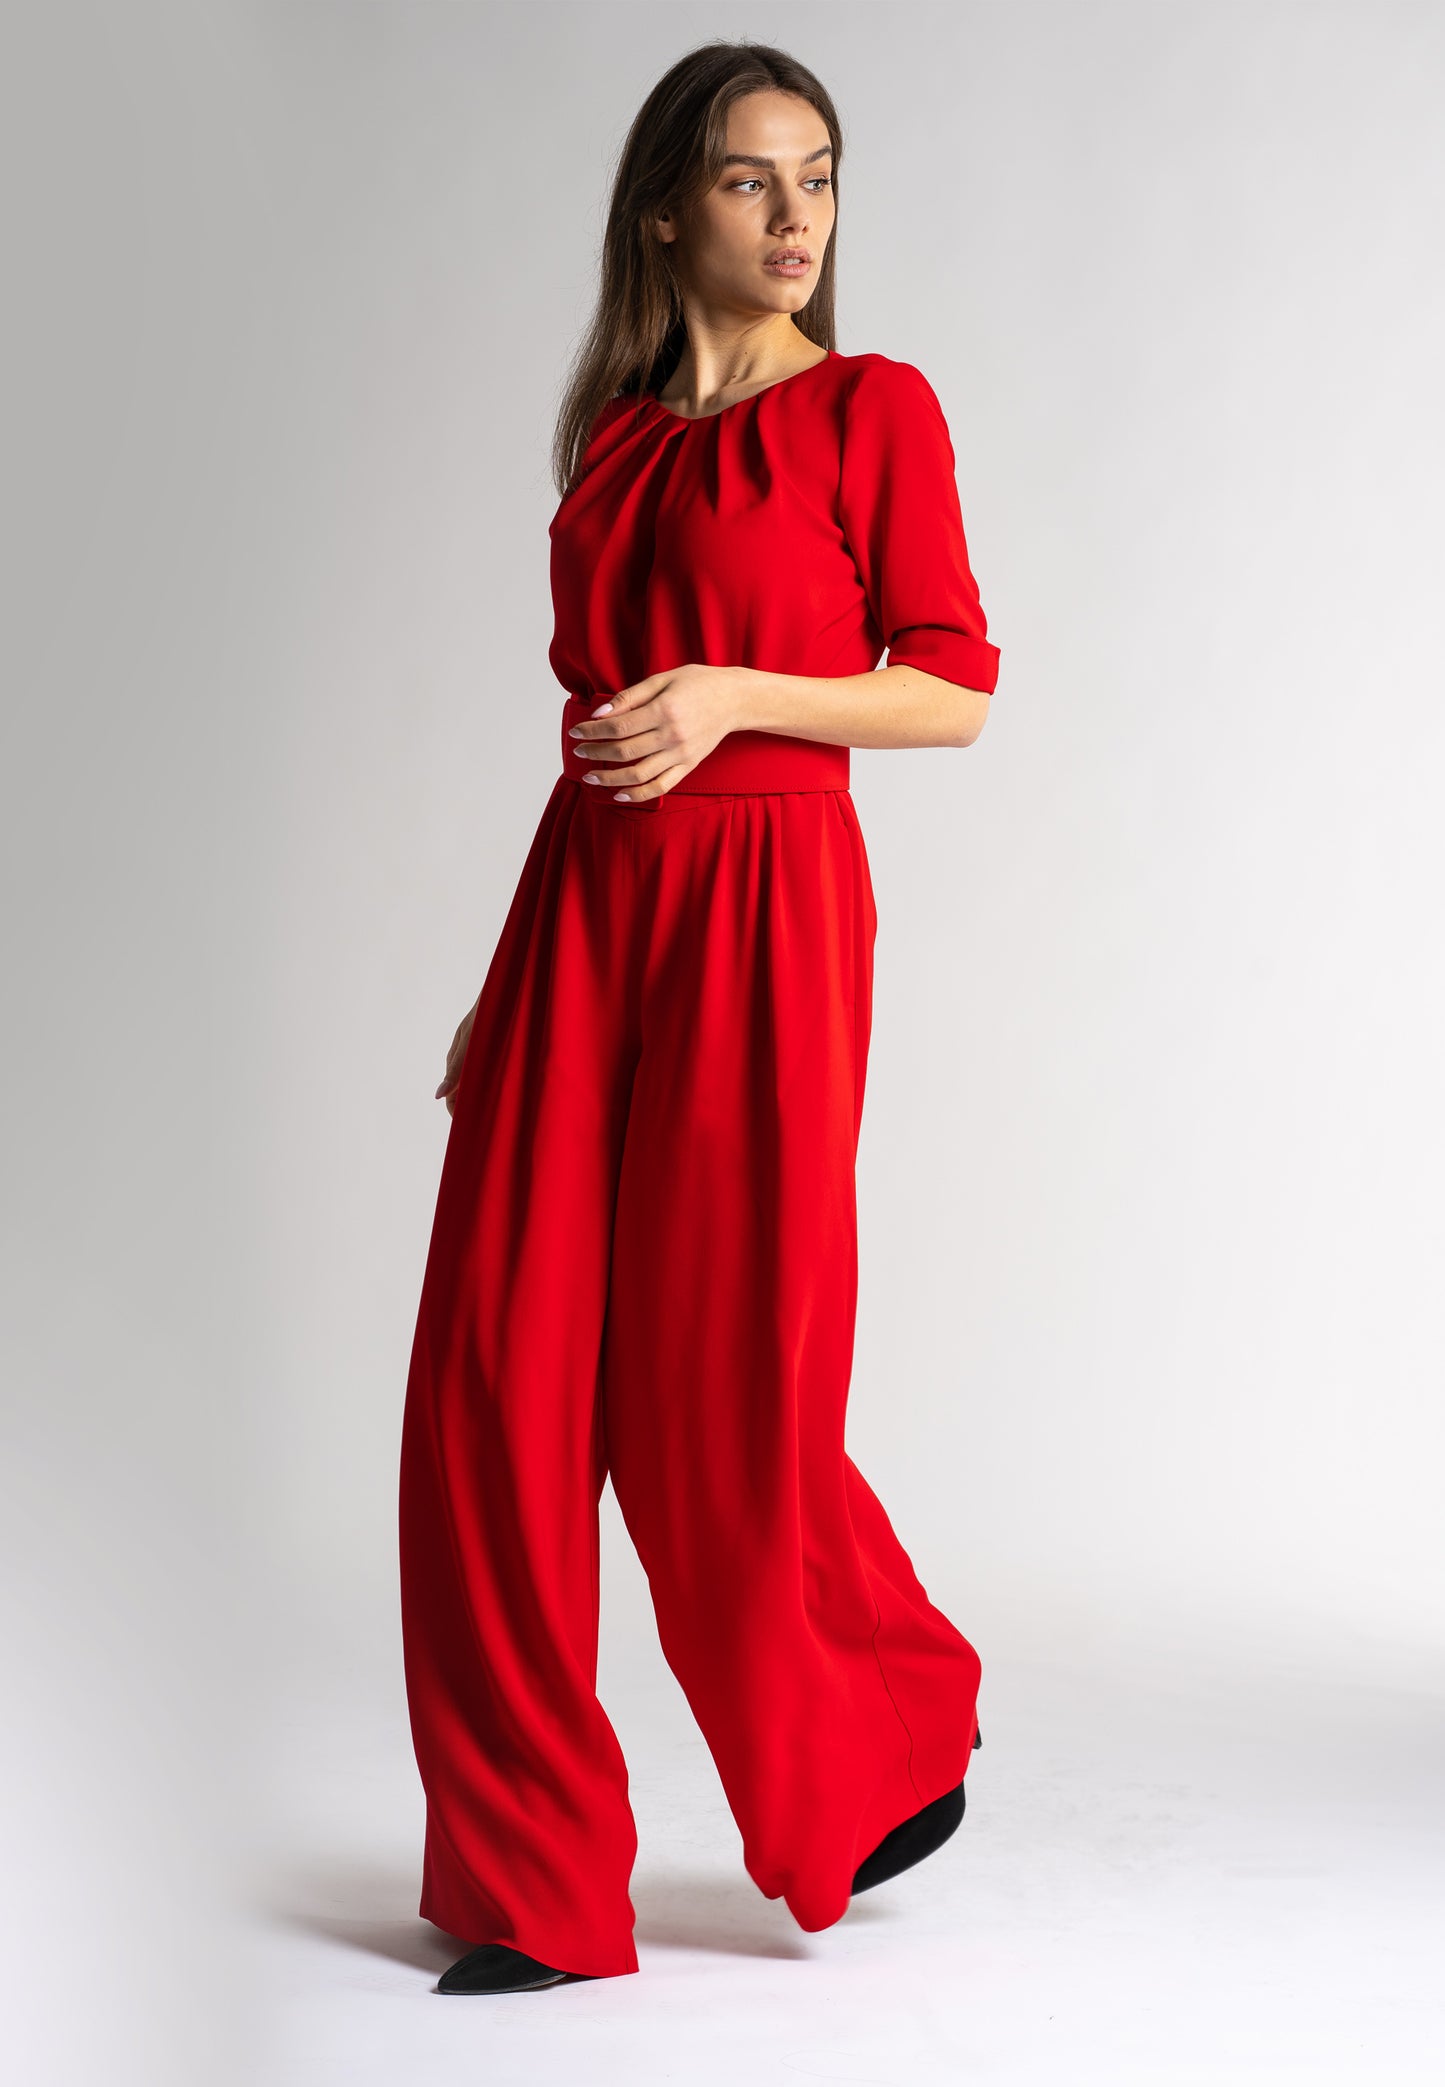 elegant women's clothing italian fashion brands  red jumpsuit  red jumpsuit australia red jumpsuit for women red jumpsuit with red belt red jumpsuit with pockets long red jumpsuit wide leg jumpsuit loose jumpsuit with pockets jumpsuit with pockets made in italy clothing